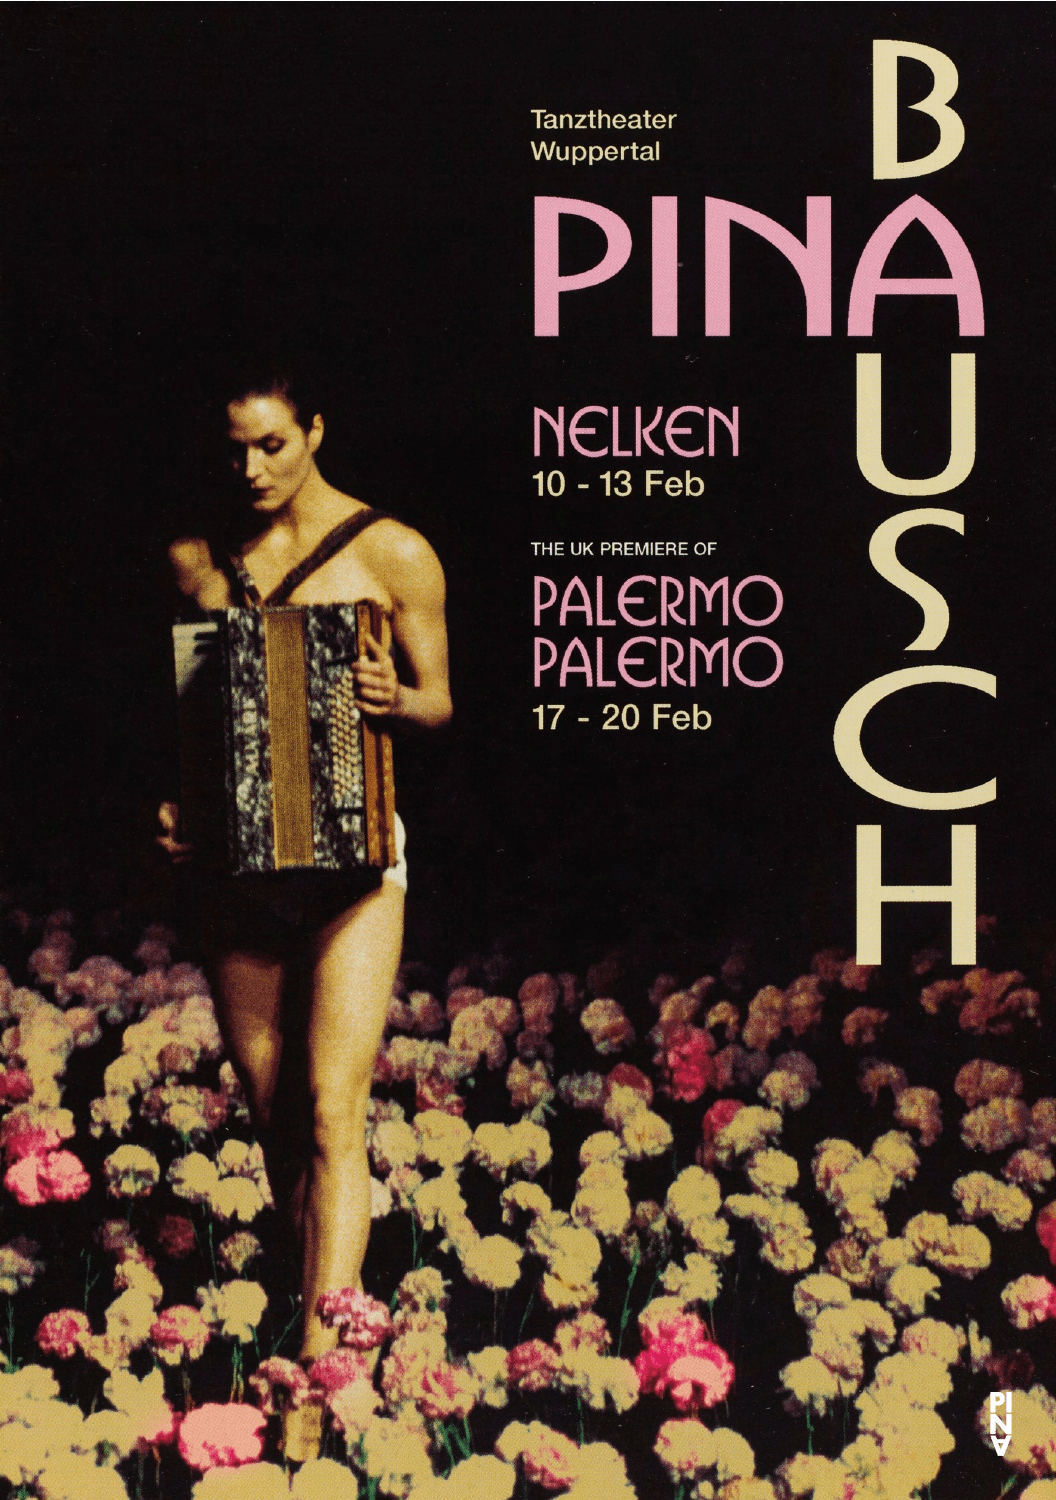 Flyer for “Nelken (Carnations)” and “Palermo Palermo” by Pina Bausch with Tanztheater Wuppertal in in London, 02/10/2005 – 02/20/2005